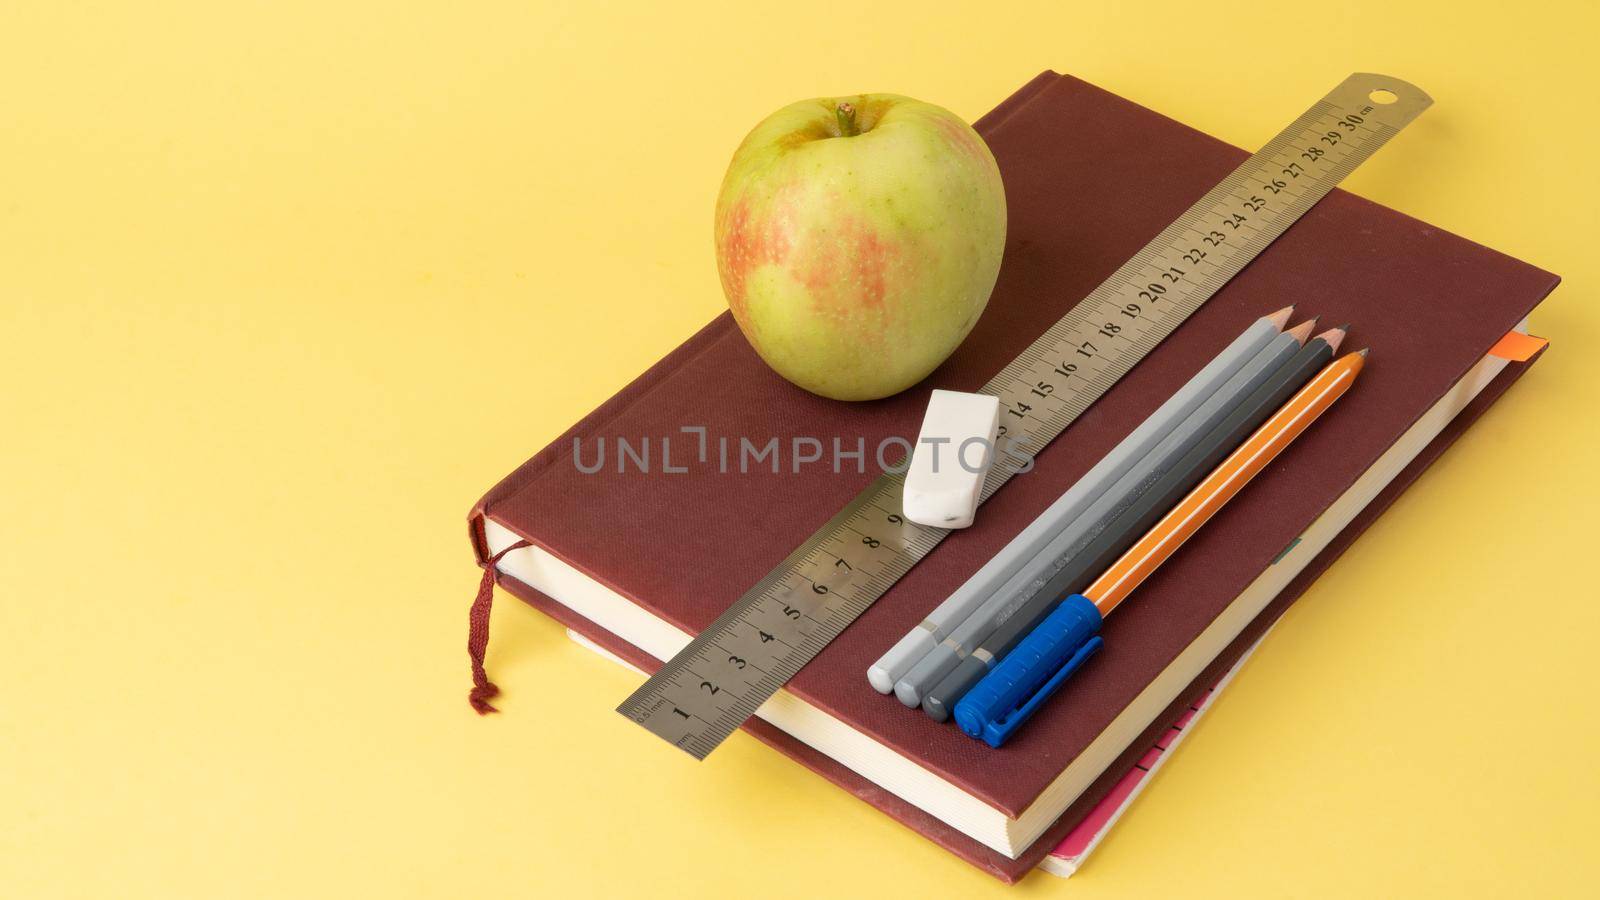 Educational supplies - stationery, book, apple on a yellow background. High quality photo